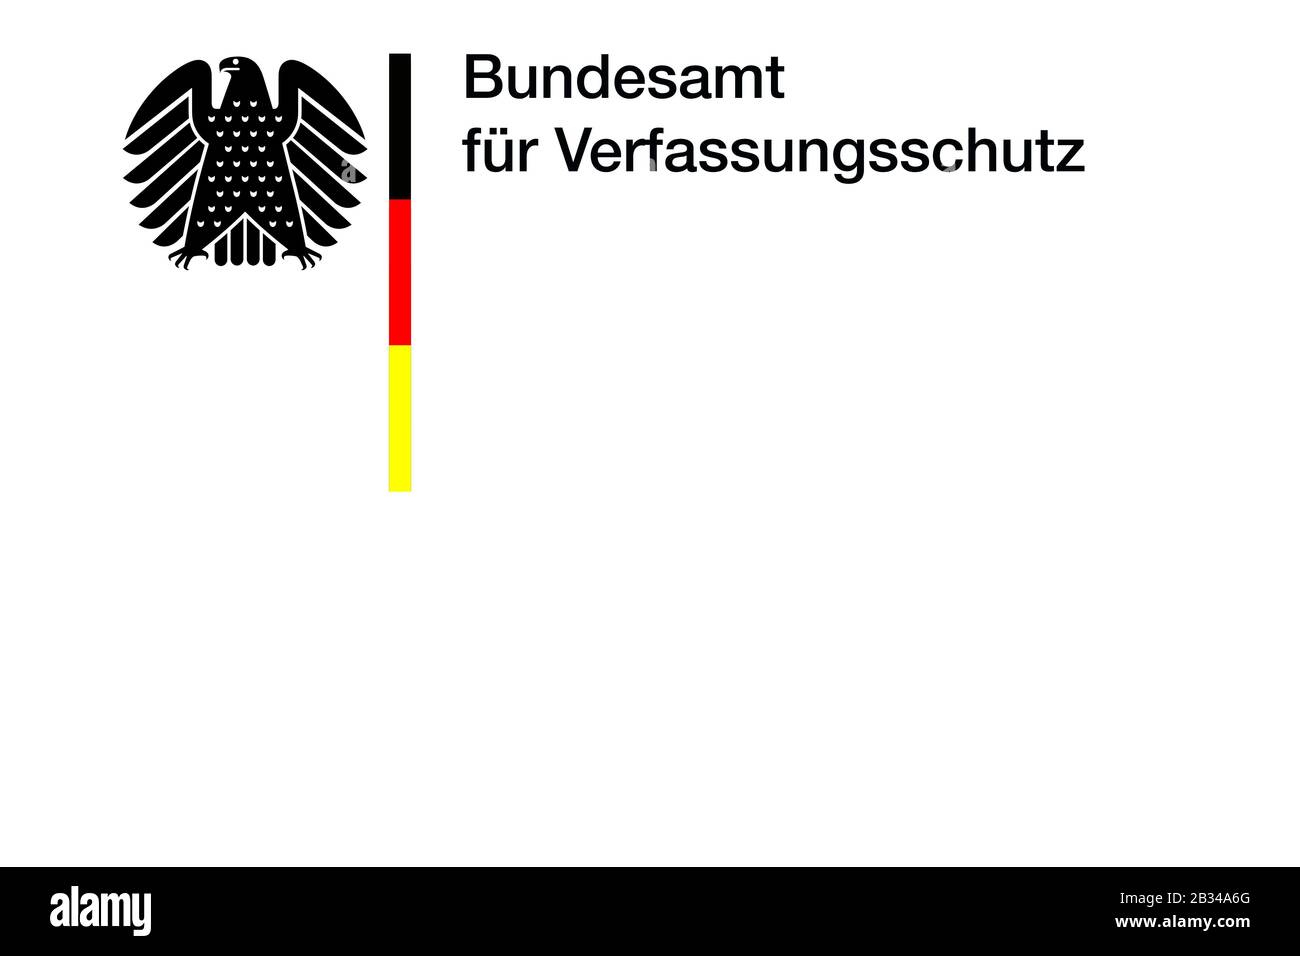 Bundesamt fuer Verfassungsschutz, Federal Office for the Protection of the Constitution, letterhead, Germany Stock Photo